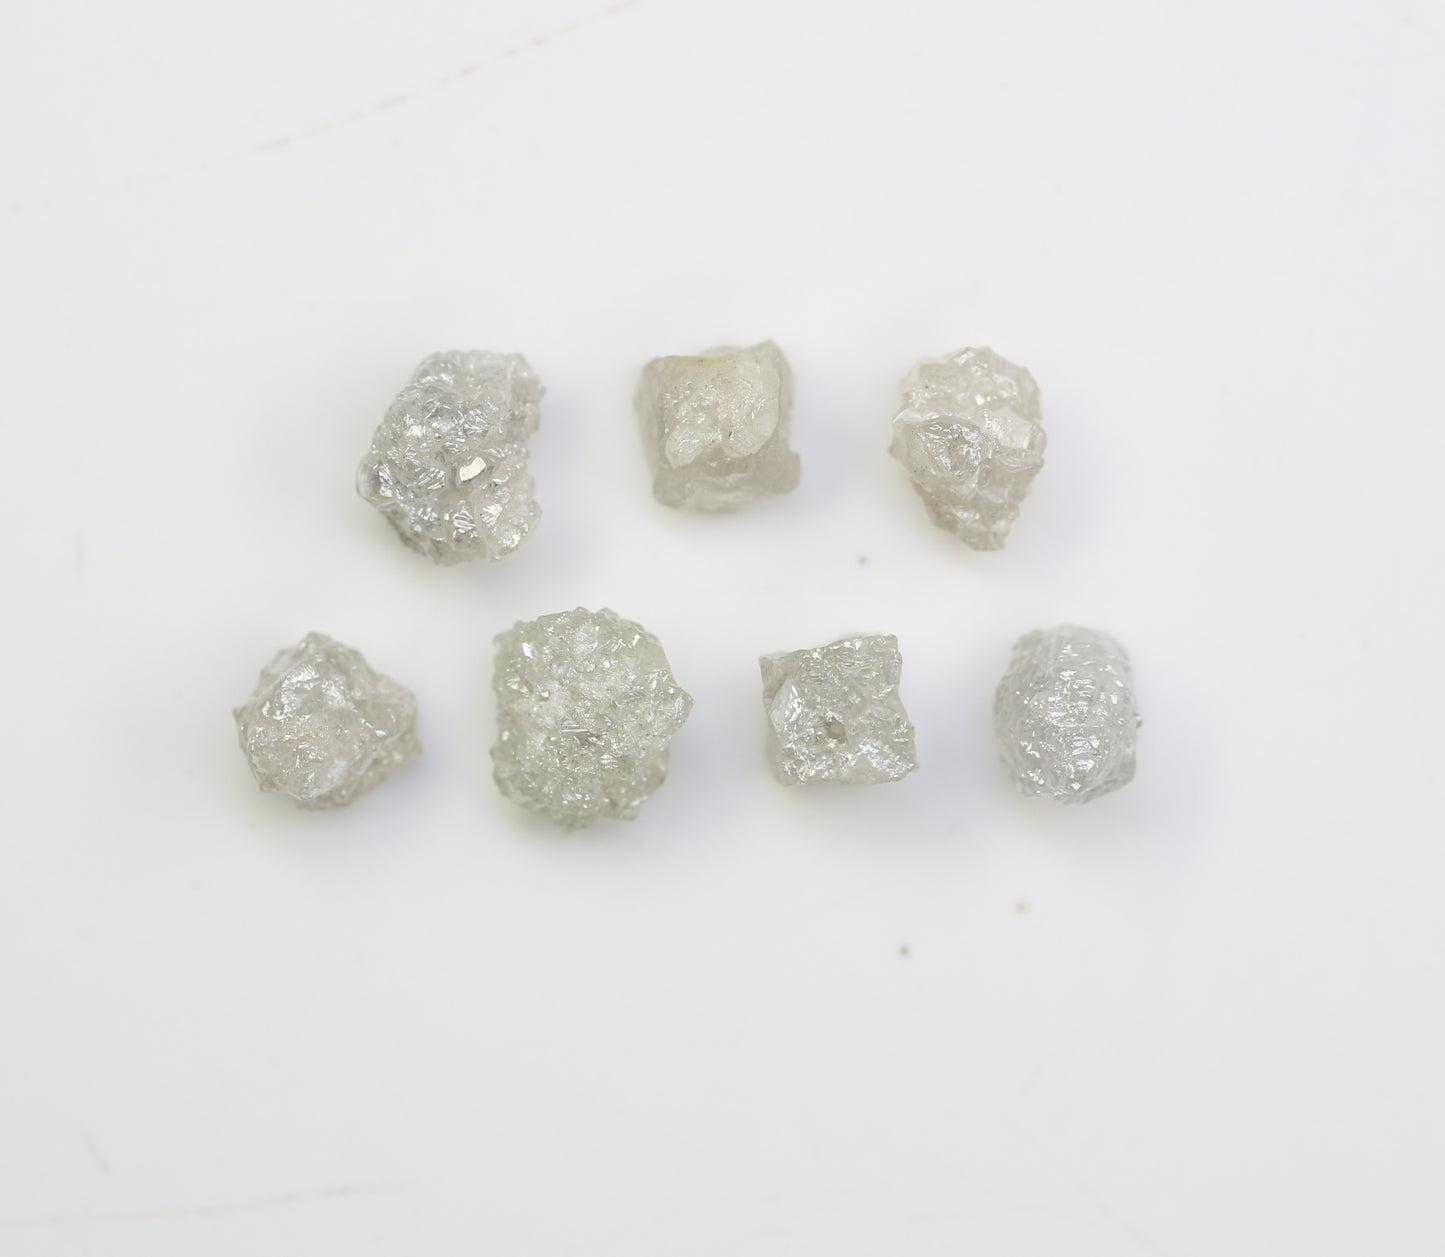 3.39 CT Uncut Raw Grey Rough Diamond For Engagement Ring